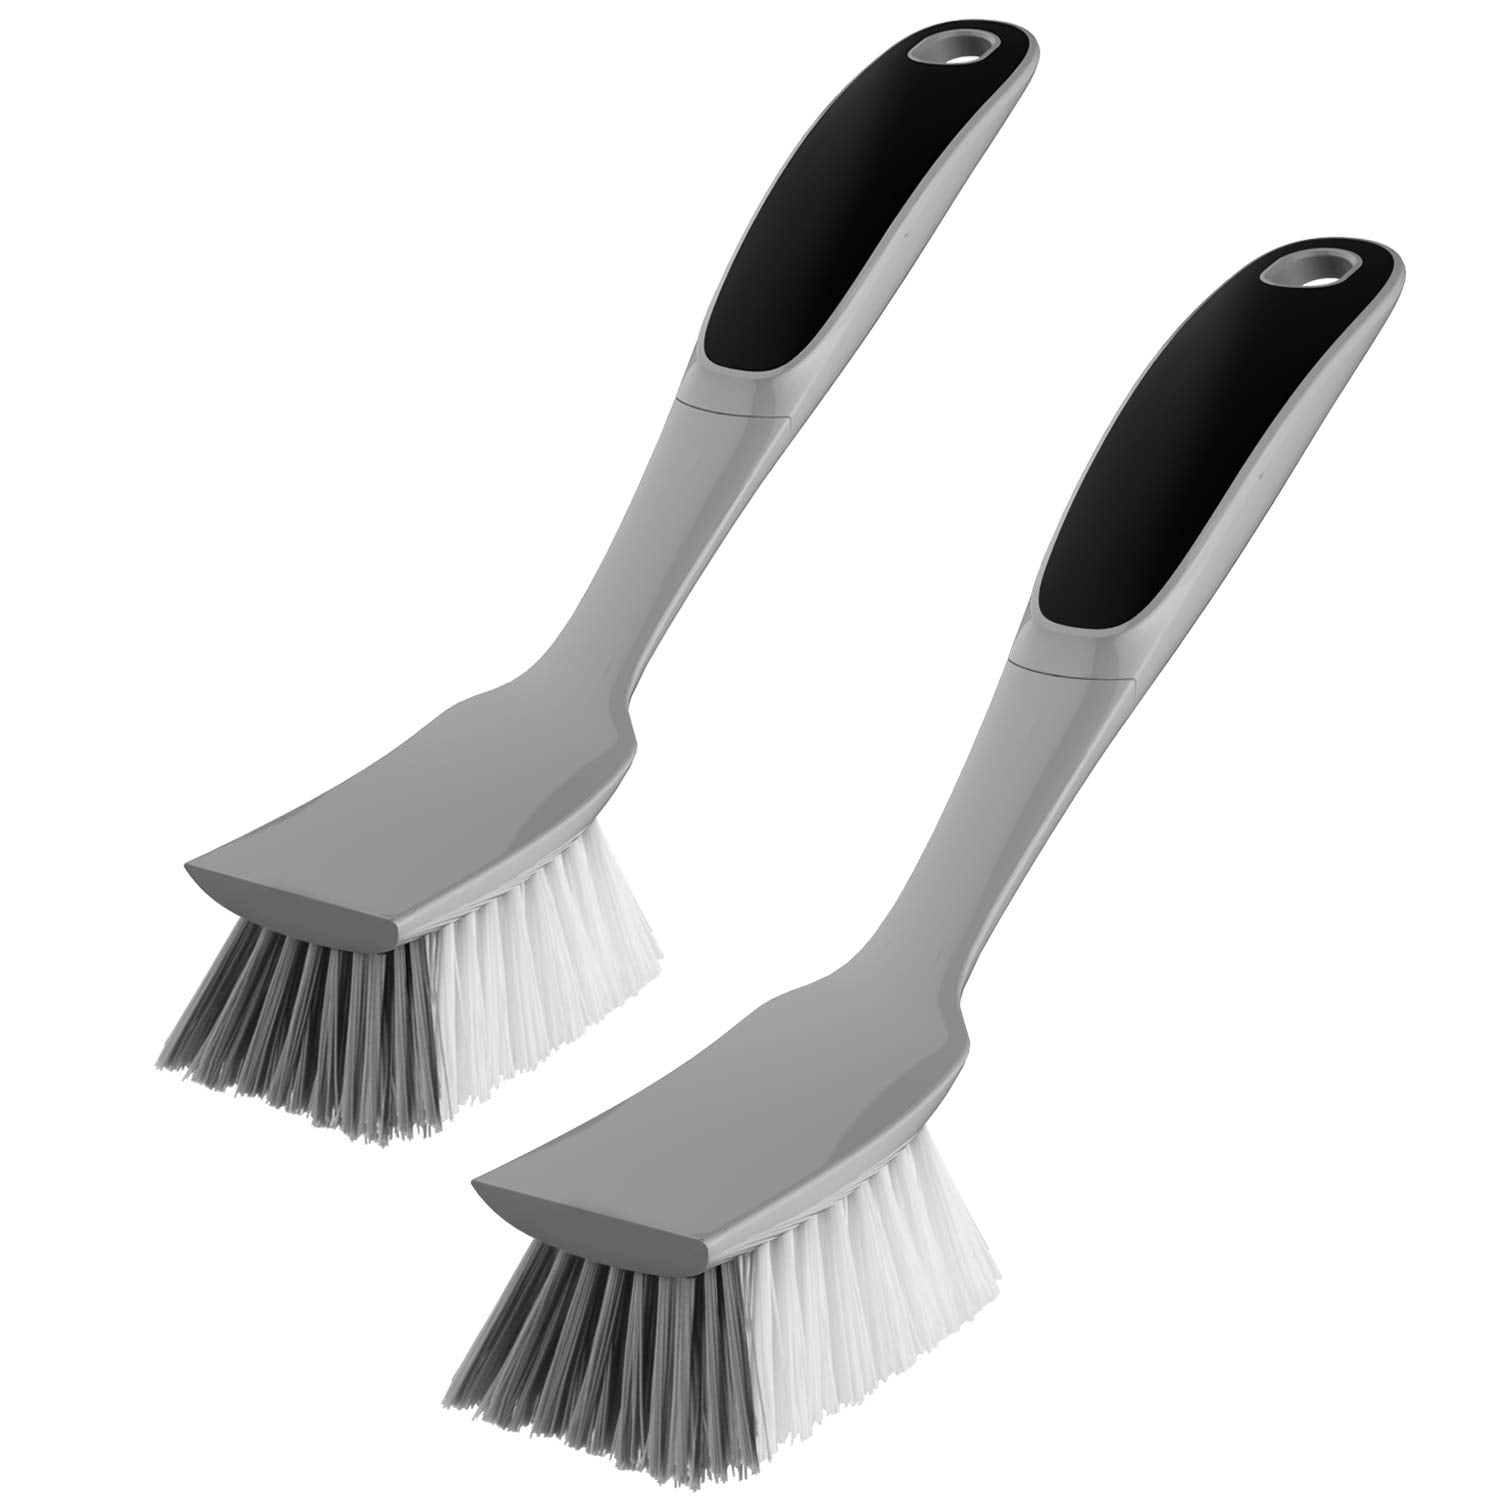 Spogears Dish Brush 3 Pack - Dish Scrubber Brush with Built-in Scraper - Kitchen Brush for Dishes - Kitchen Scrub Brush with Grip Friendly Handle - di